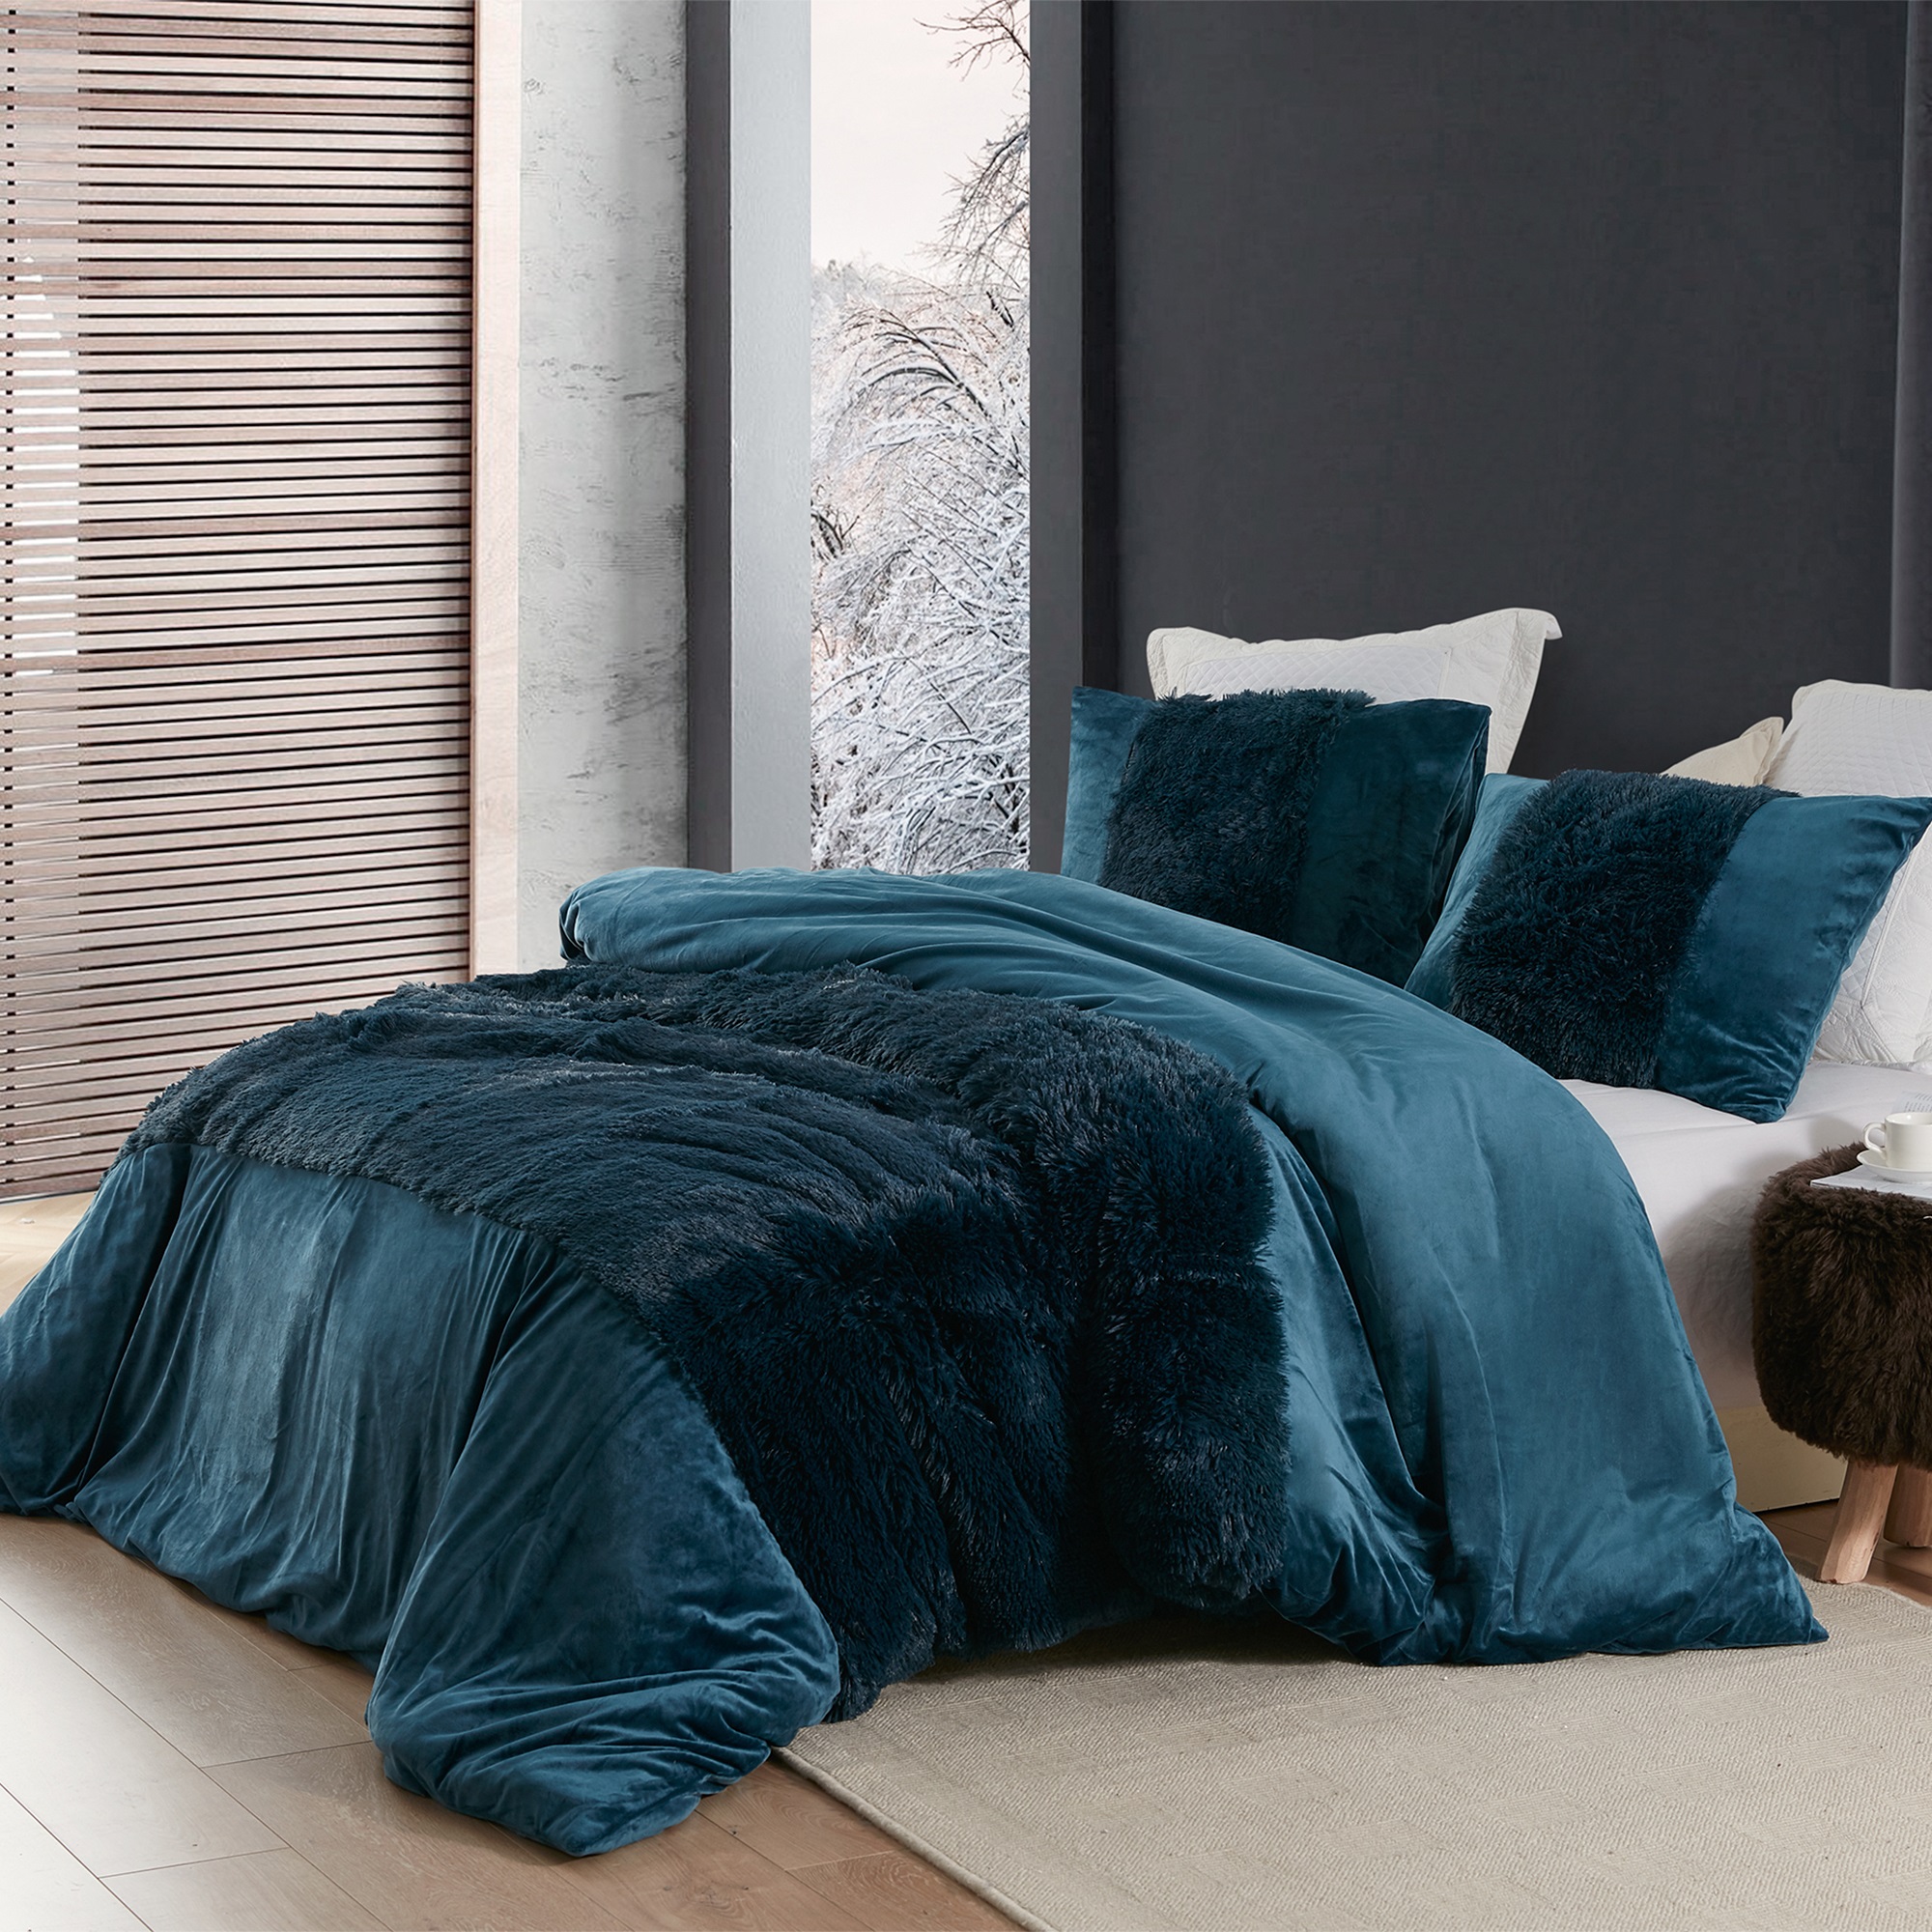 Coma Inducer Duvet Cover - Are You Kidding? - Nightfall Navy